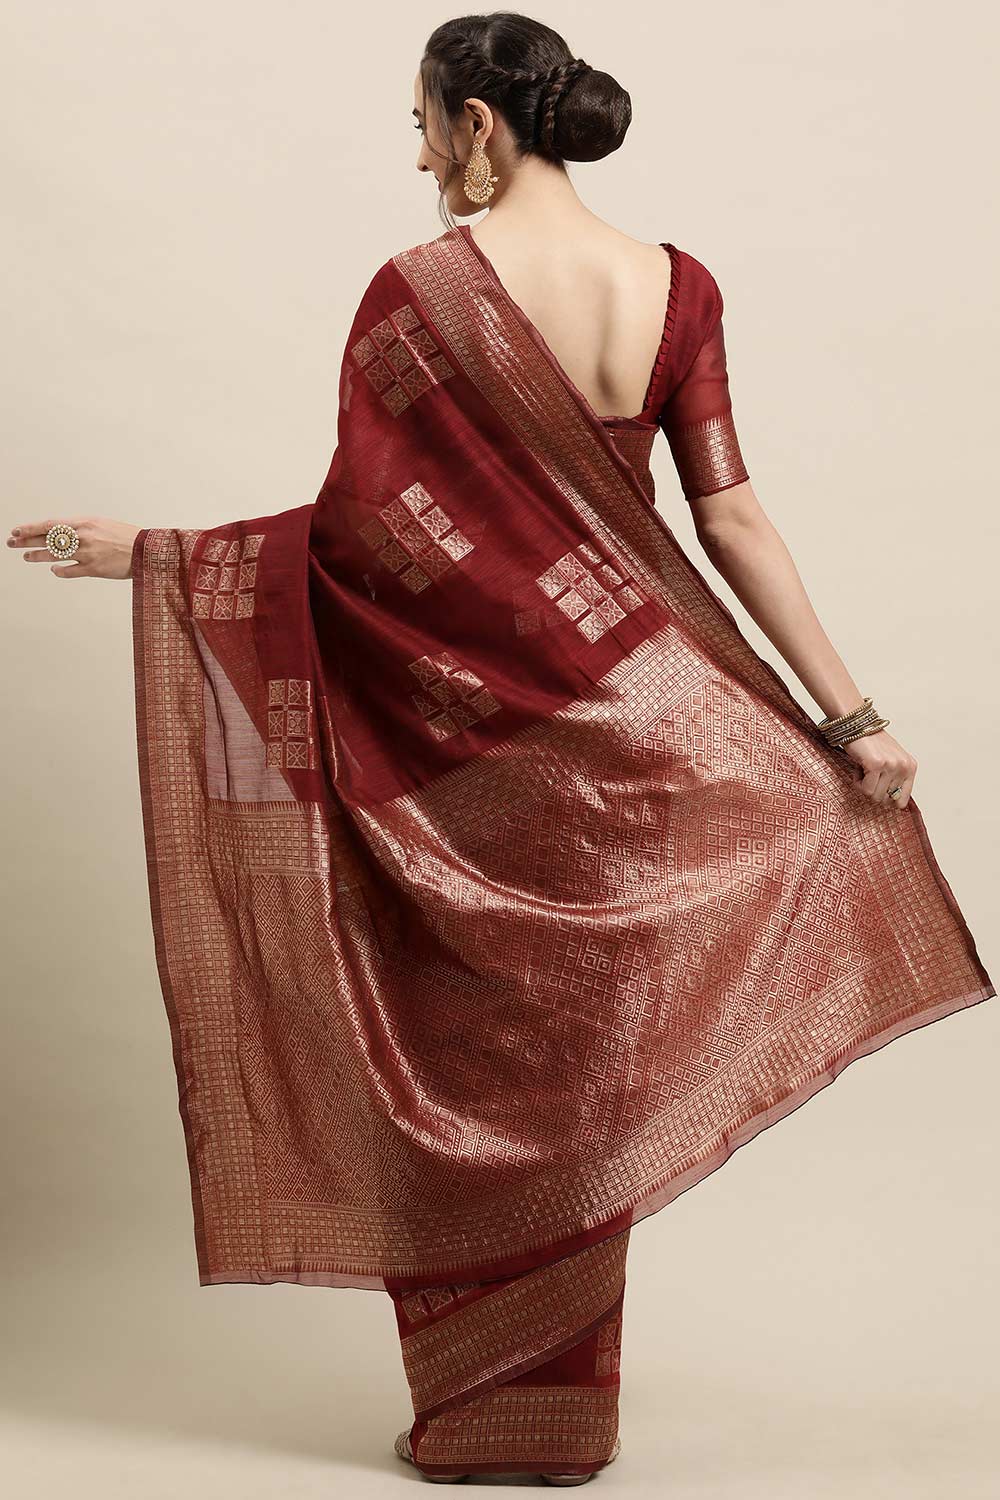 Shop Sula Burgundy Woven Linen One Minute Saree at best offer at our  Store - One Minute Saree